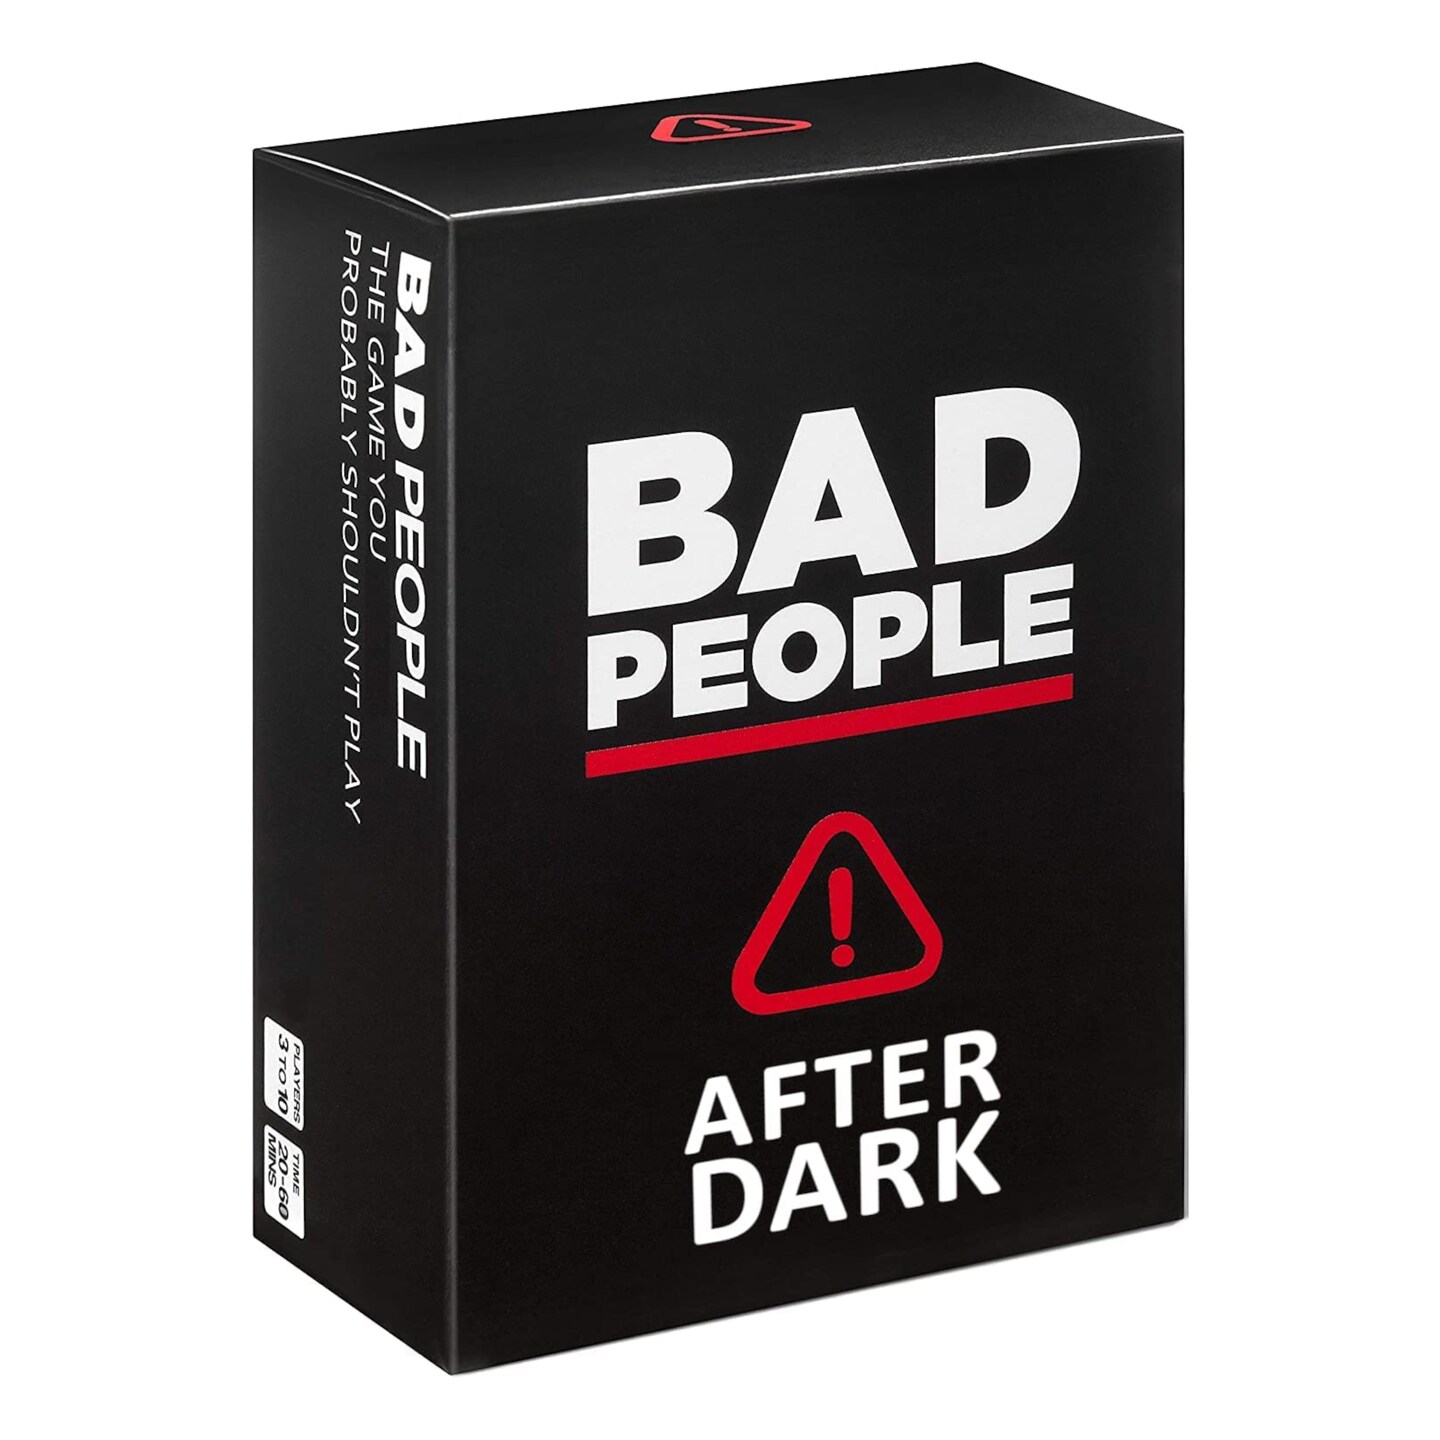 BAD PEOPLE - After Dark Expansion Pack (100 New Question Cards) - The Party Game You Probably Shouldn&#x27;t Play